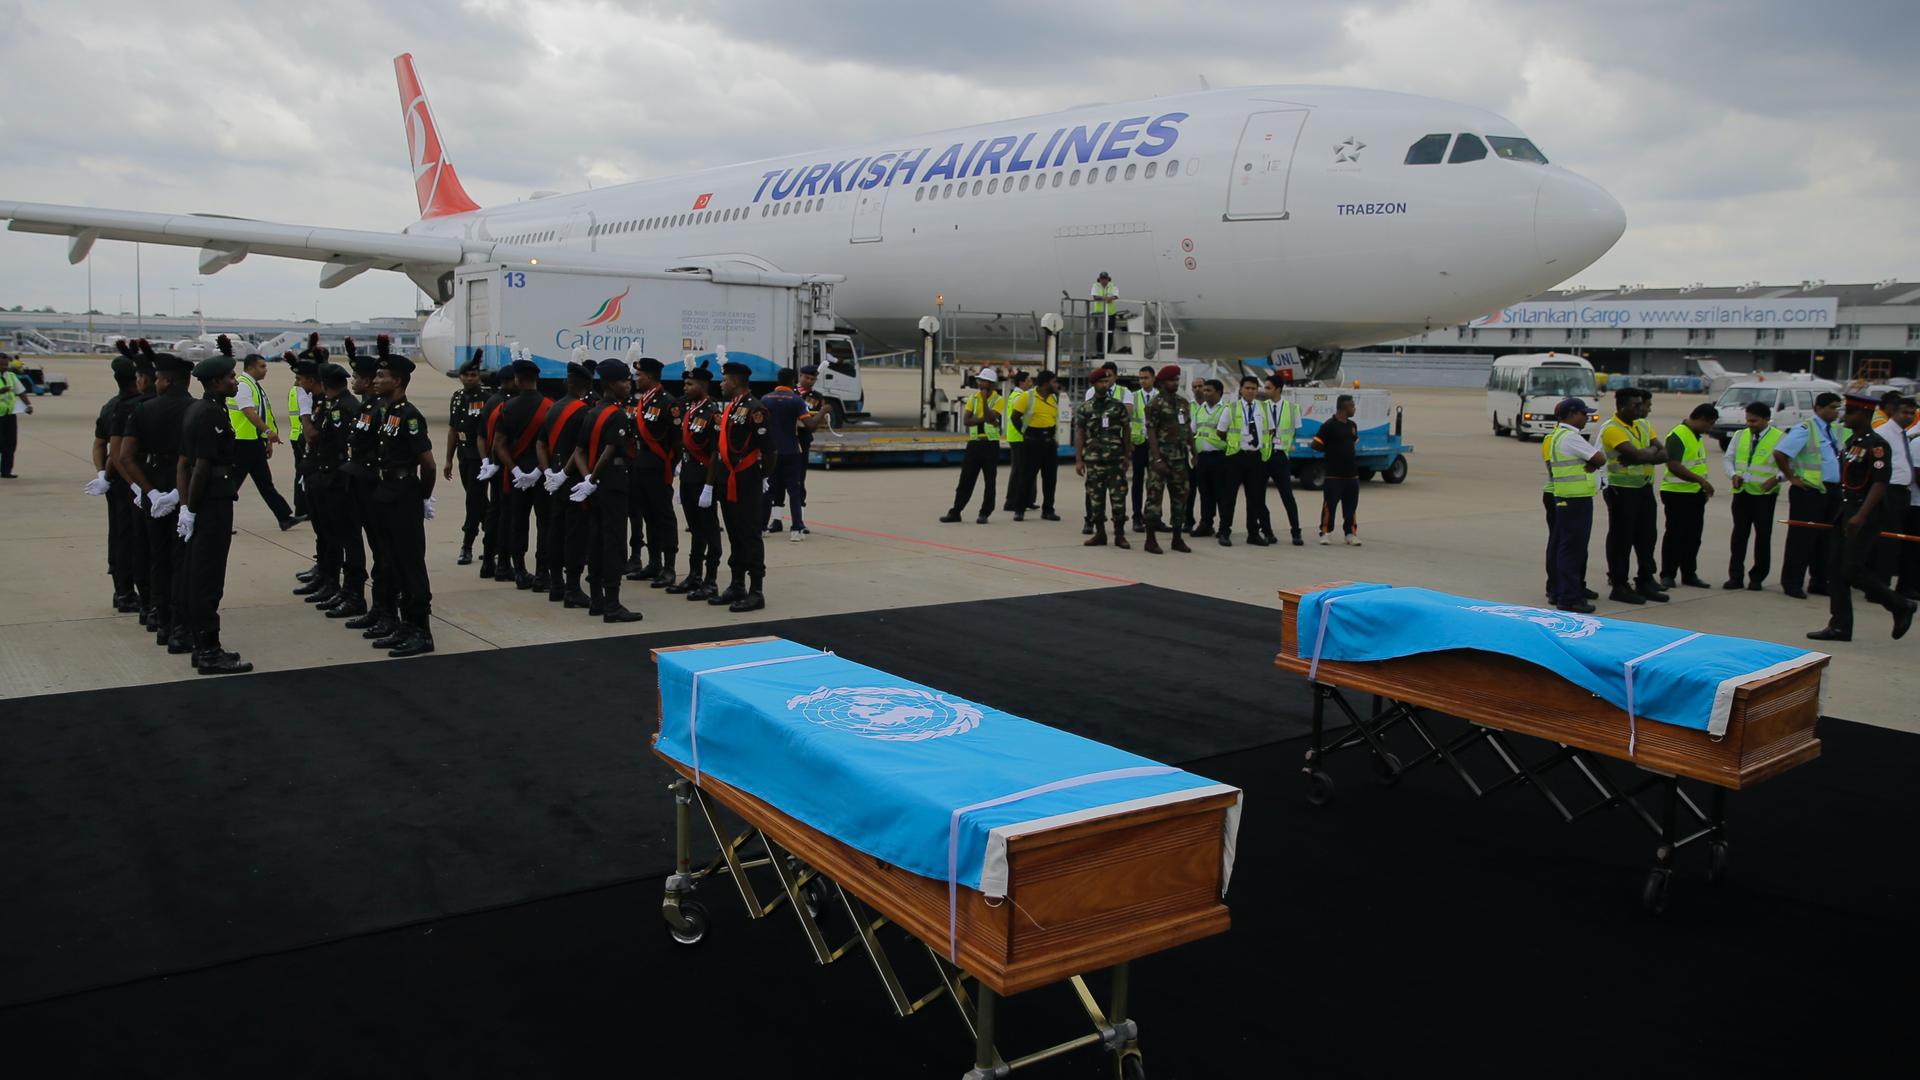 Two caskets covered with UN flags on display near a Turkish airlines plane and military personel standing nearby. 